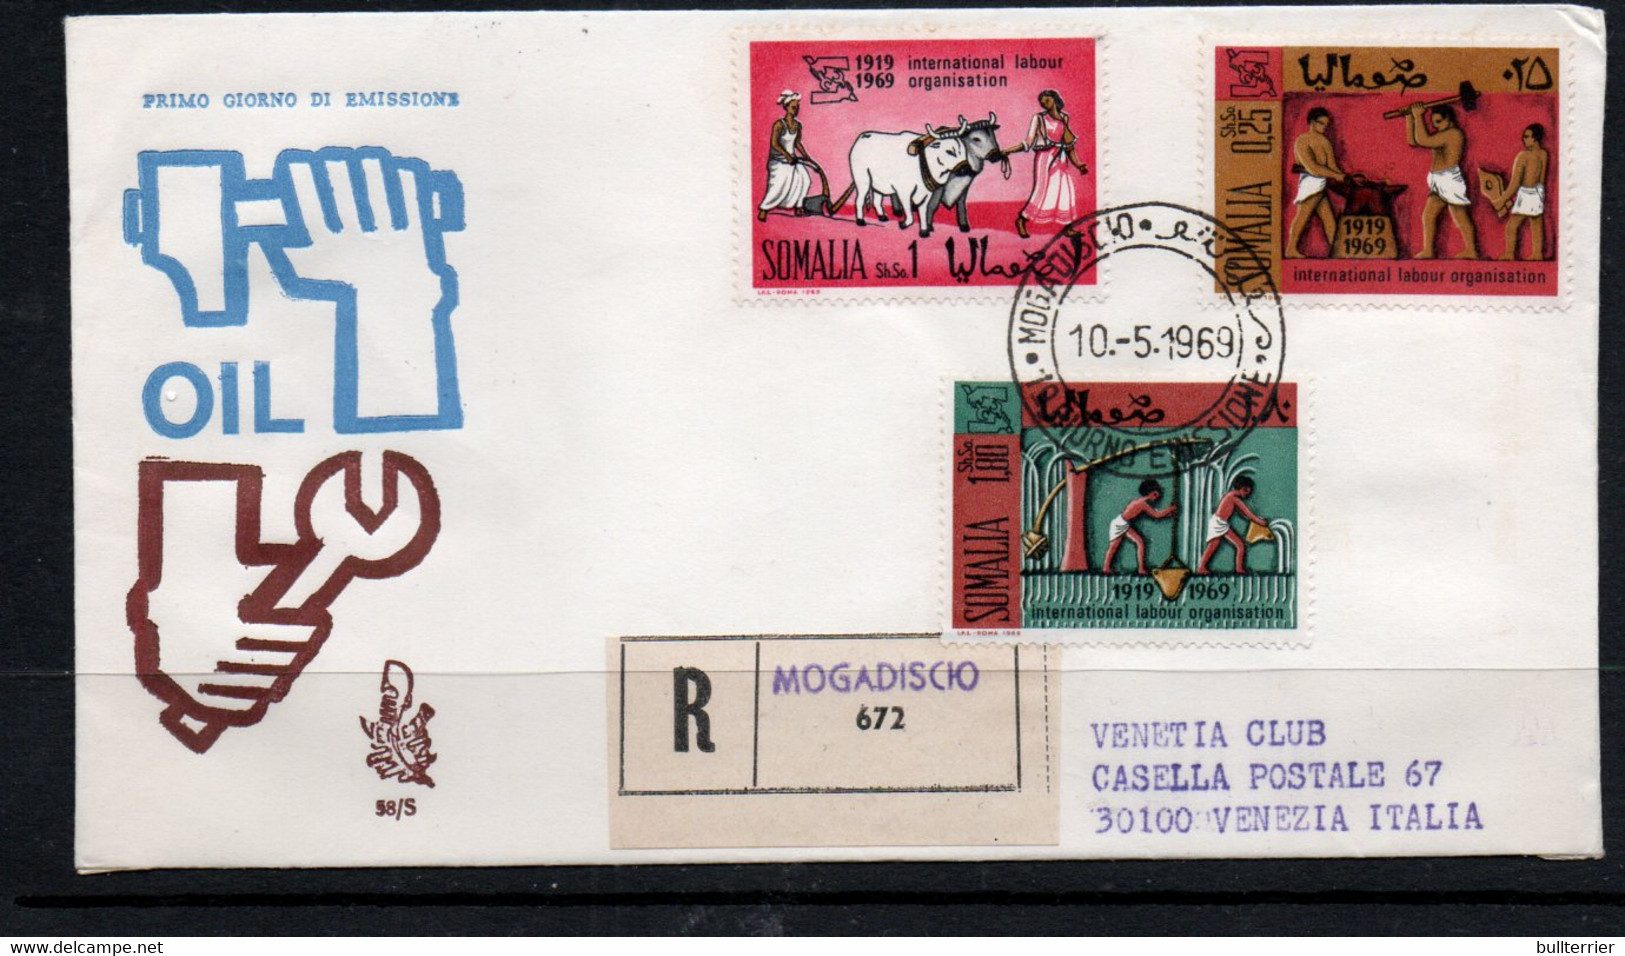 ILO  - SOMALIA - 1969 - INT LABOUR ORGANISATION SET OF 3  ON REGISTERED ILLUSTRATED FIRST DAY COVER - ILO